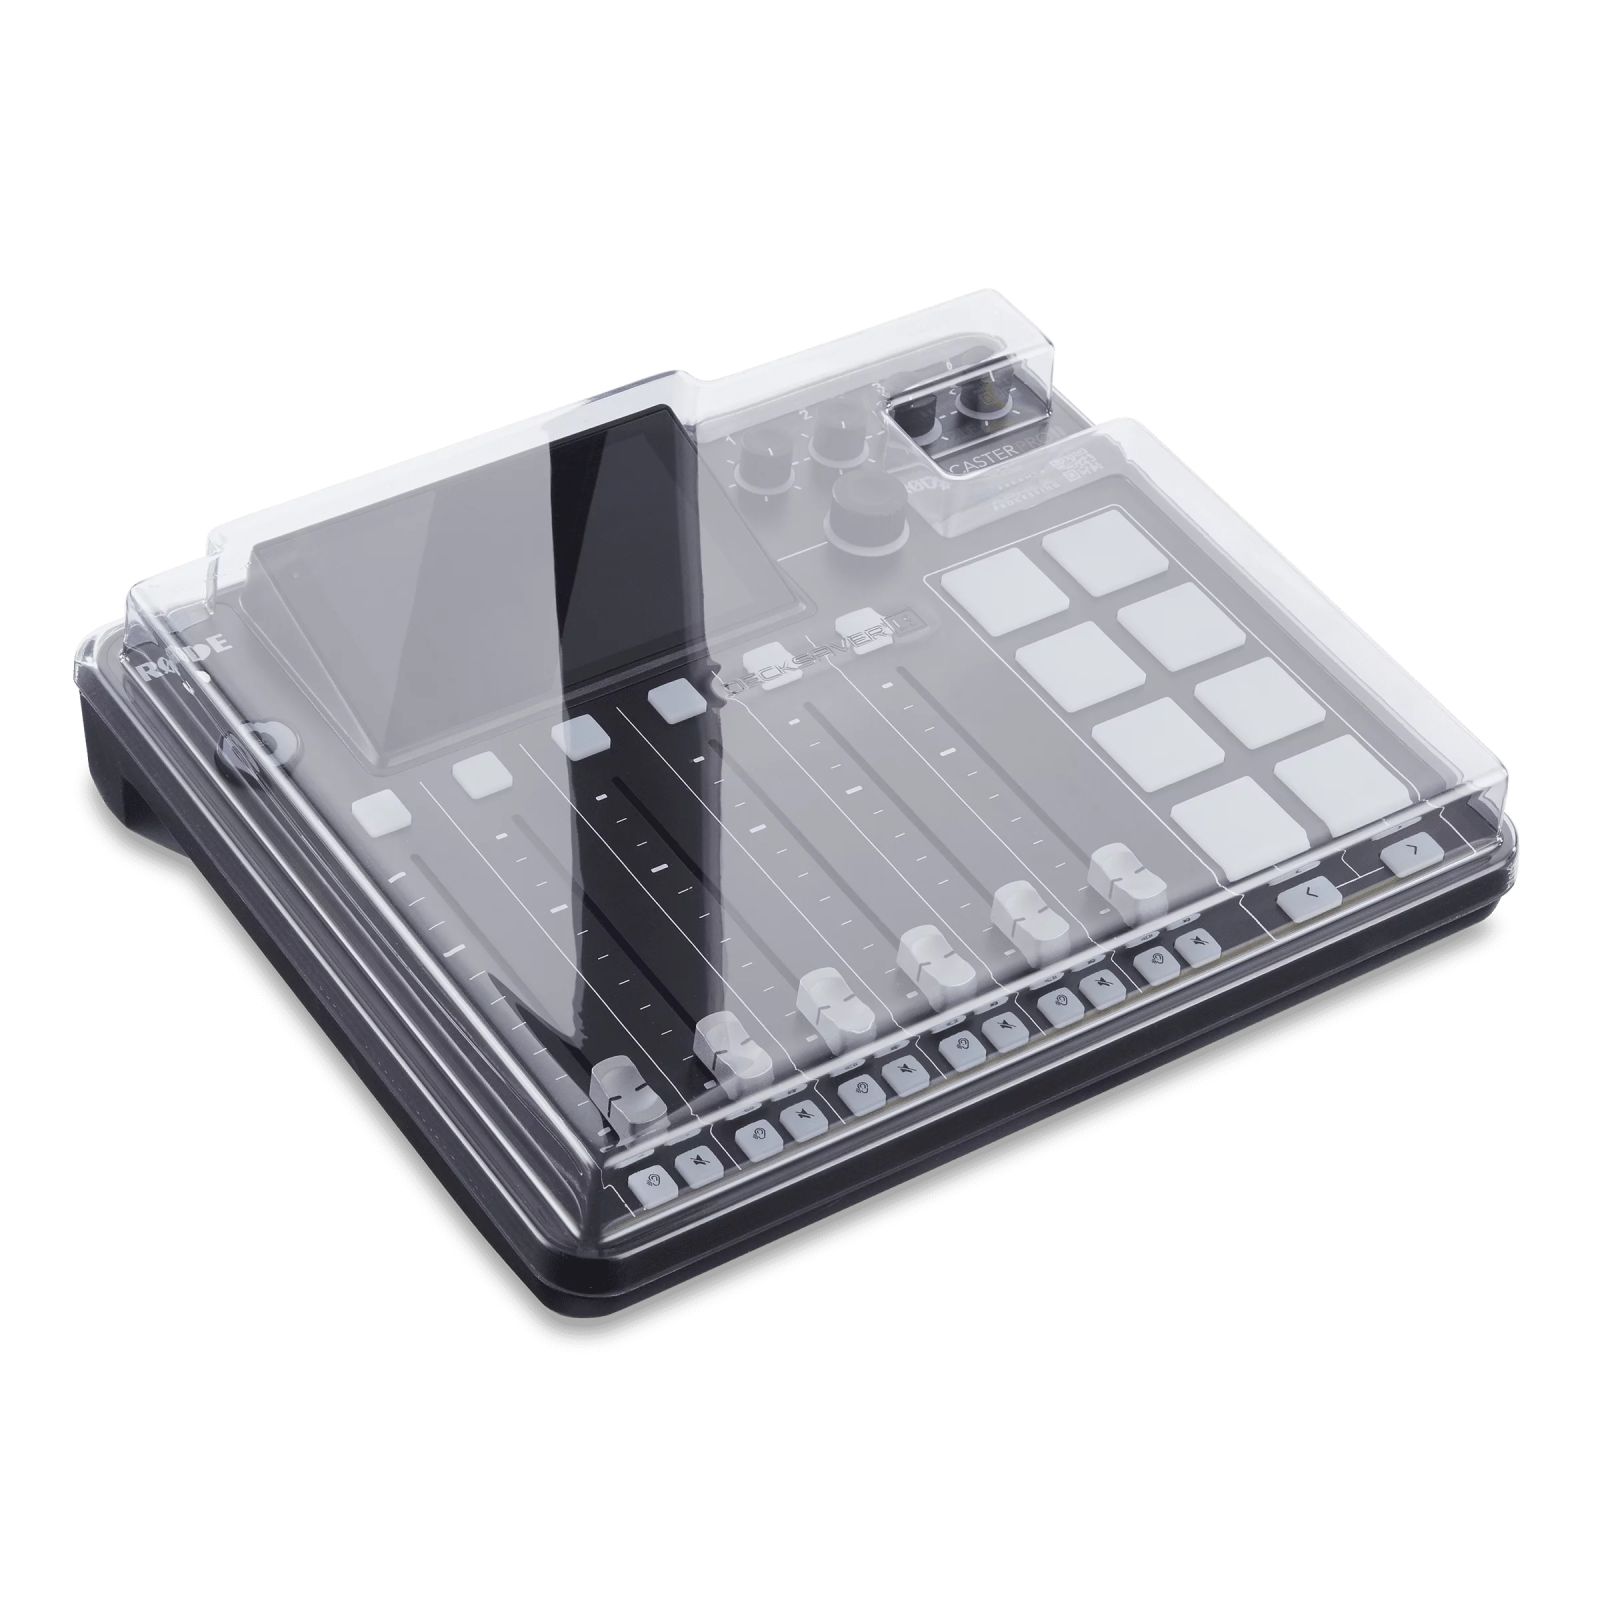 DECKSAVER LE RODE RODECASTER PRO 2 COVER (LIGHT EDITION)